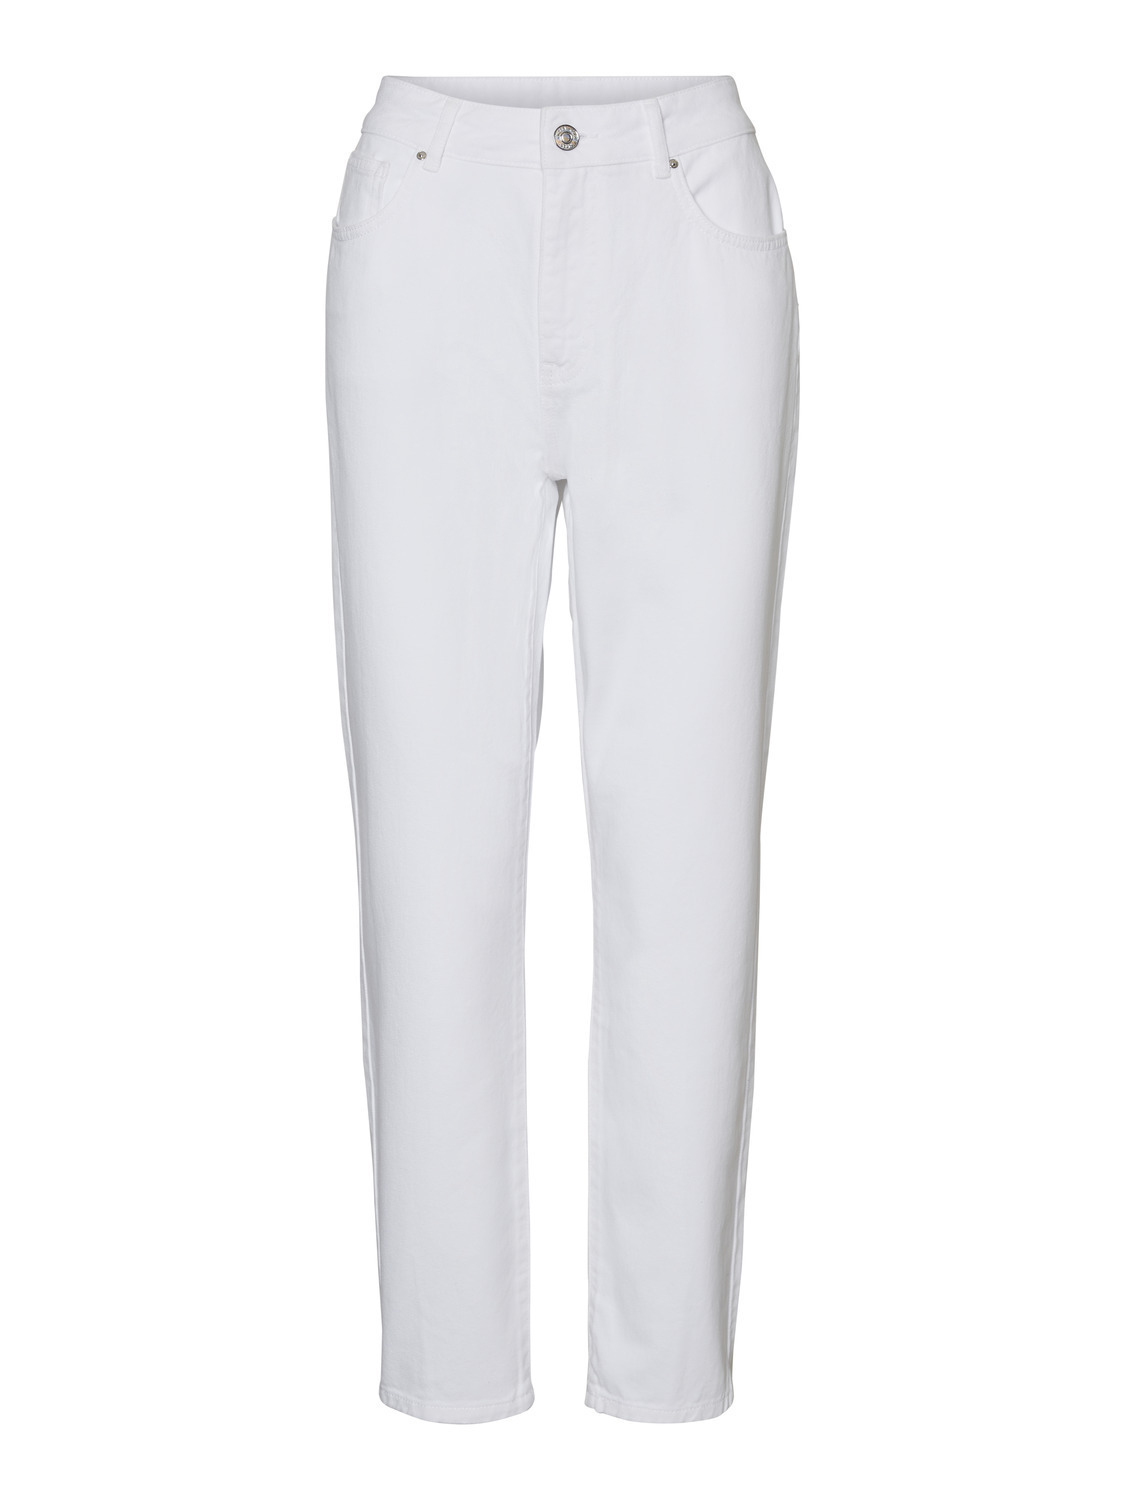 Abbigliamento Donna Noisy may Jeans Isabel in Bianco 